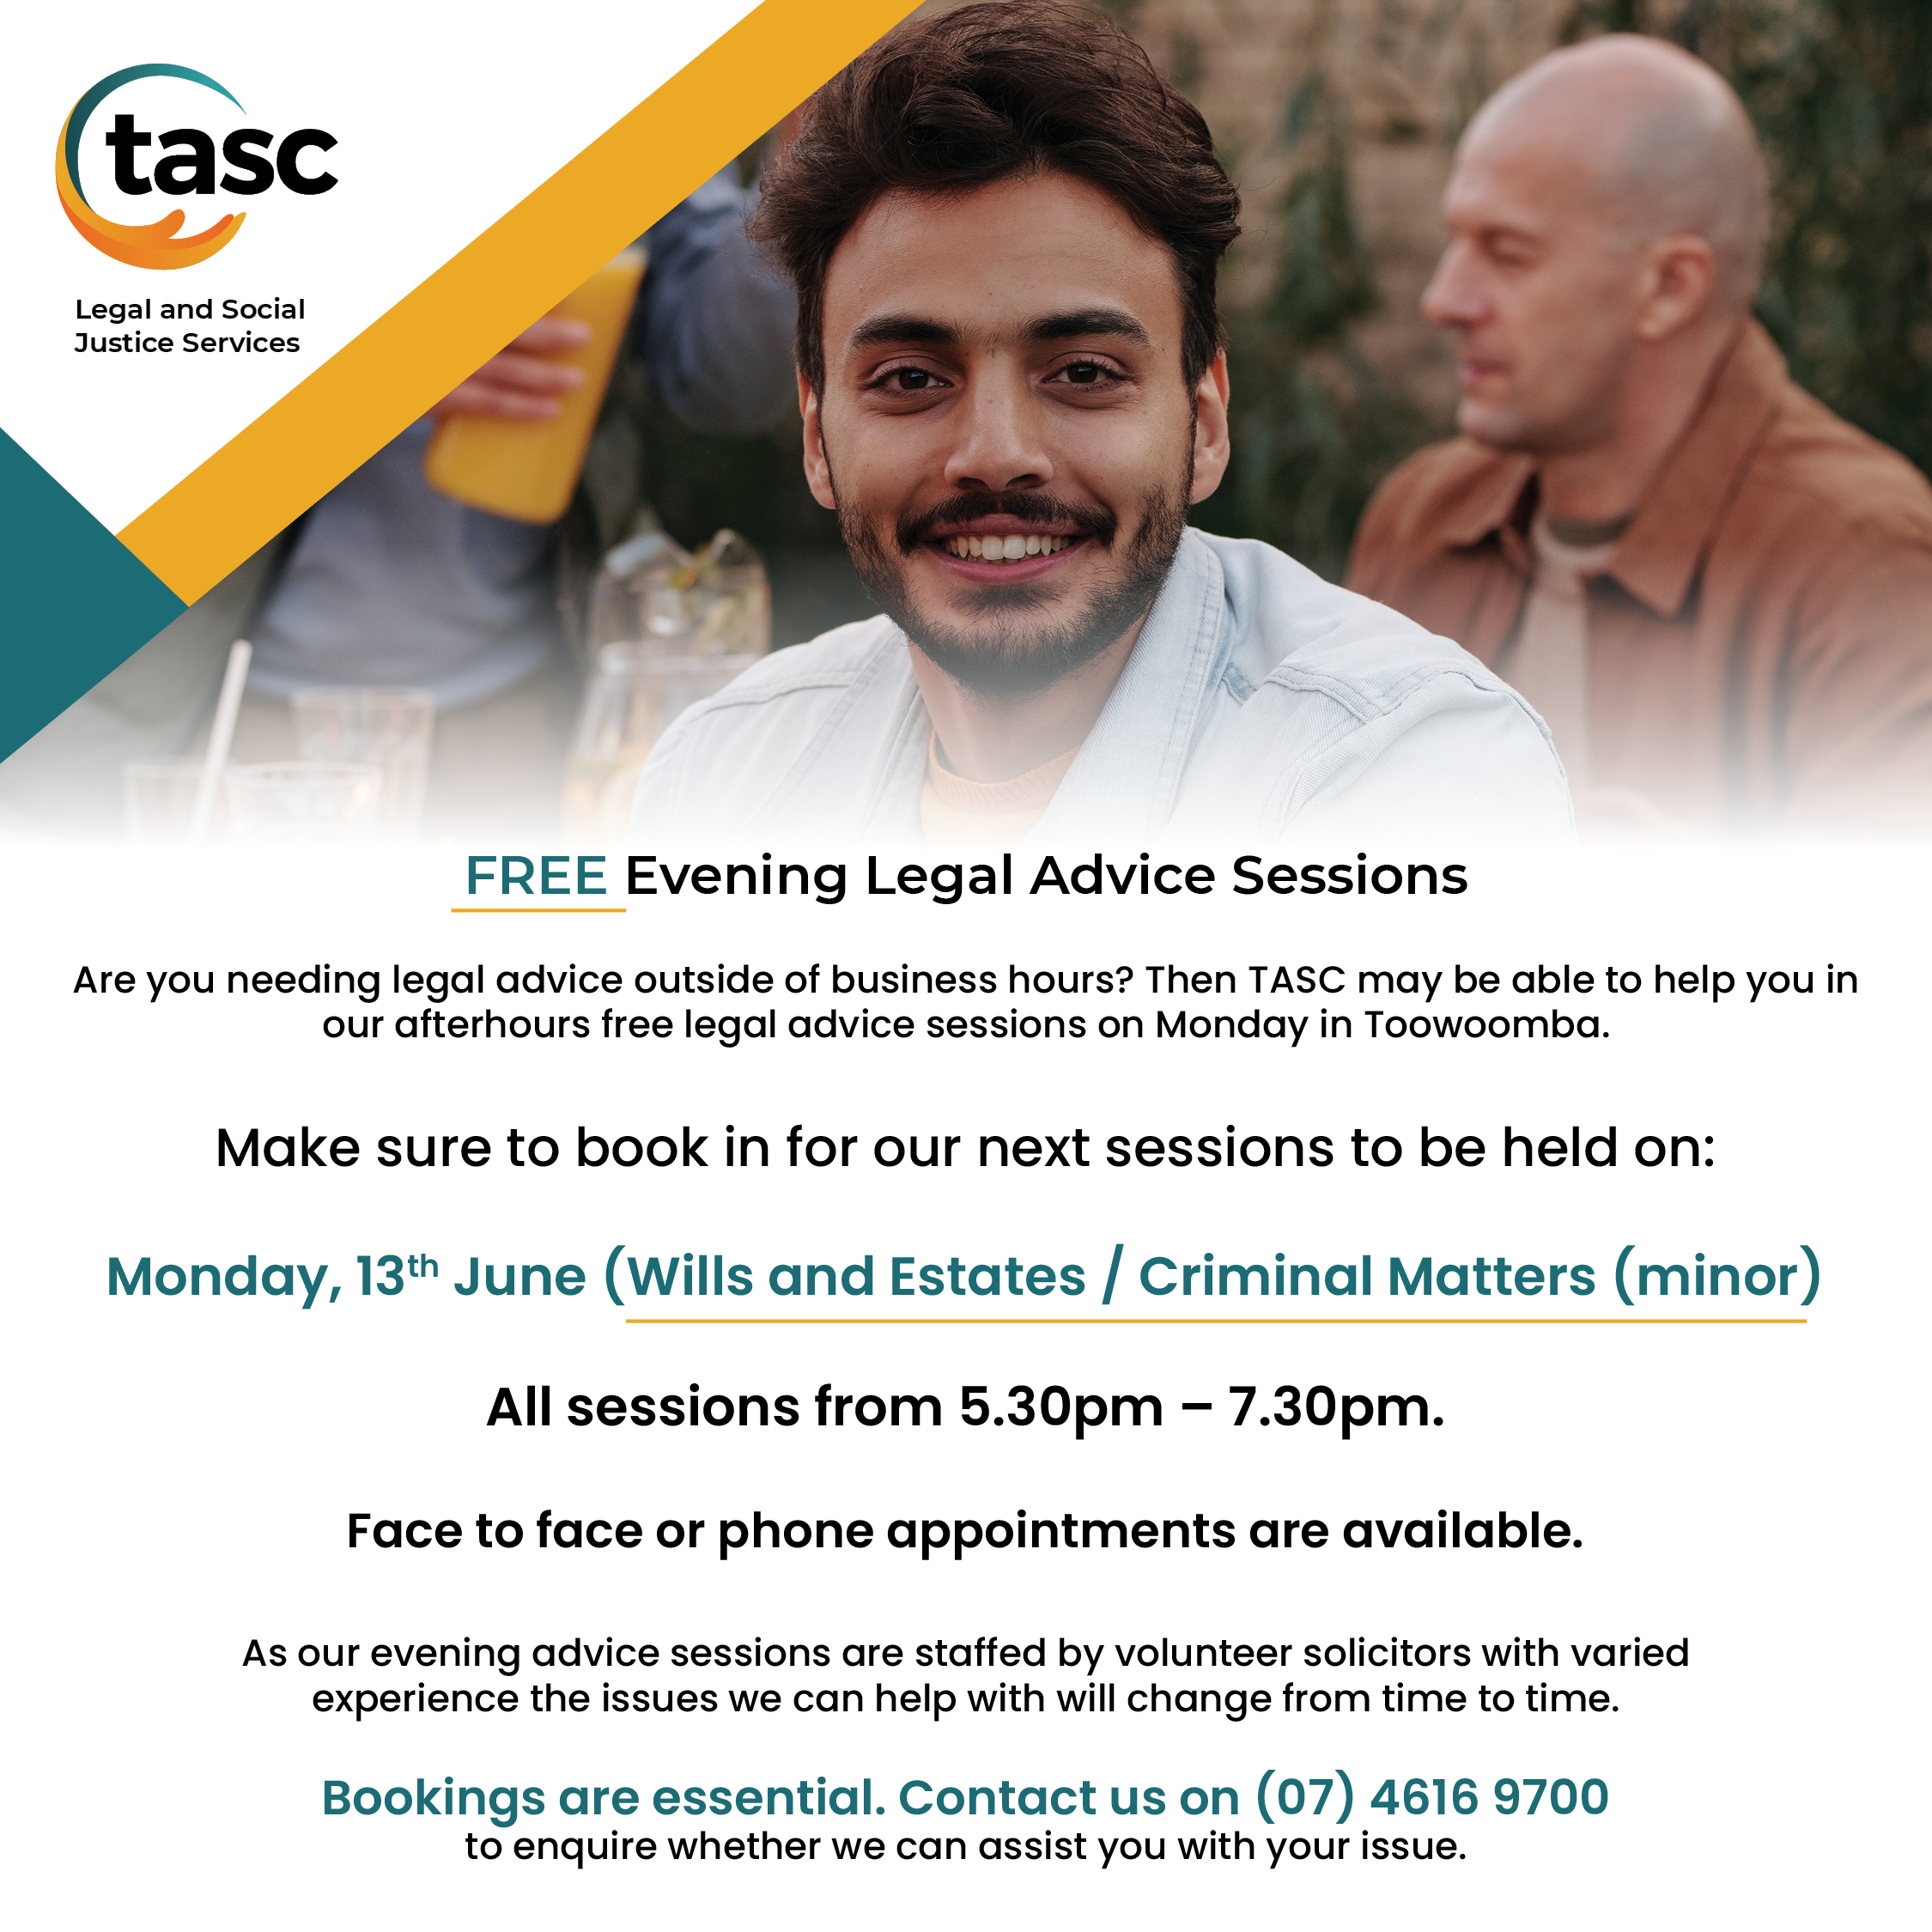 Free Evening Legal Advice Sessions – Wills and Estates / Criminal Matters (Minor) Monday, 13 June 2022